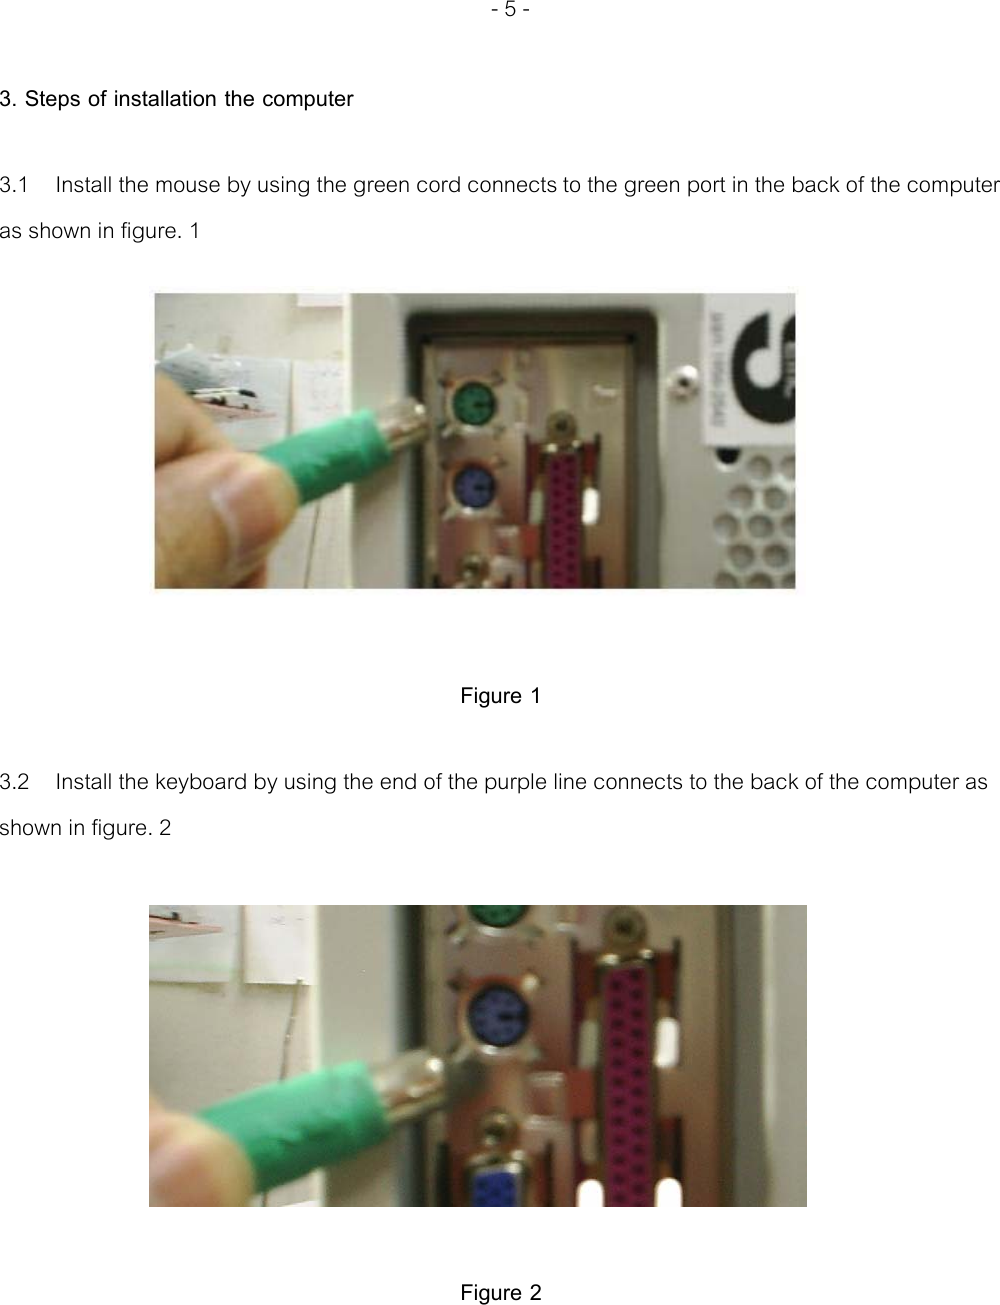   - 5 -  3. Steps of installation the computer  3.1  Install the mouse by using the green cord connects to the green port in the back of the computer as shown in figure. 1           Figure 1  3.2  Install the keyboard by using the end of the purple line connects to the back of the computer as shown in figure. 2            Figure 2   